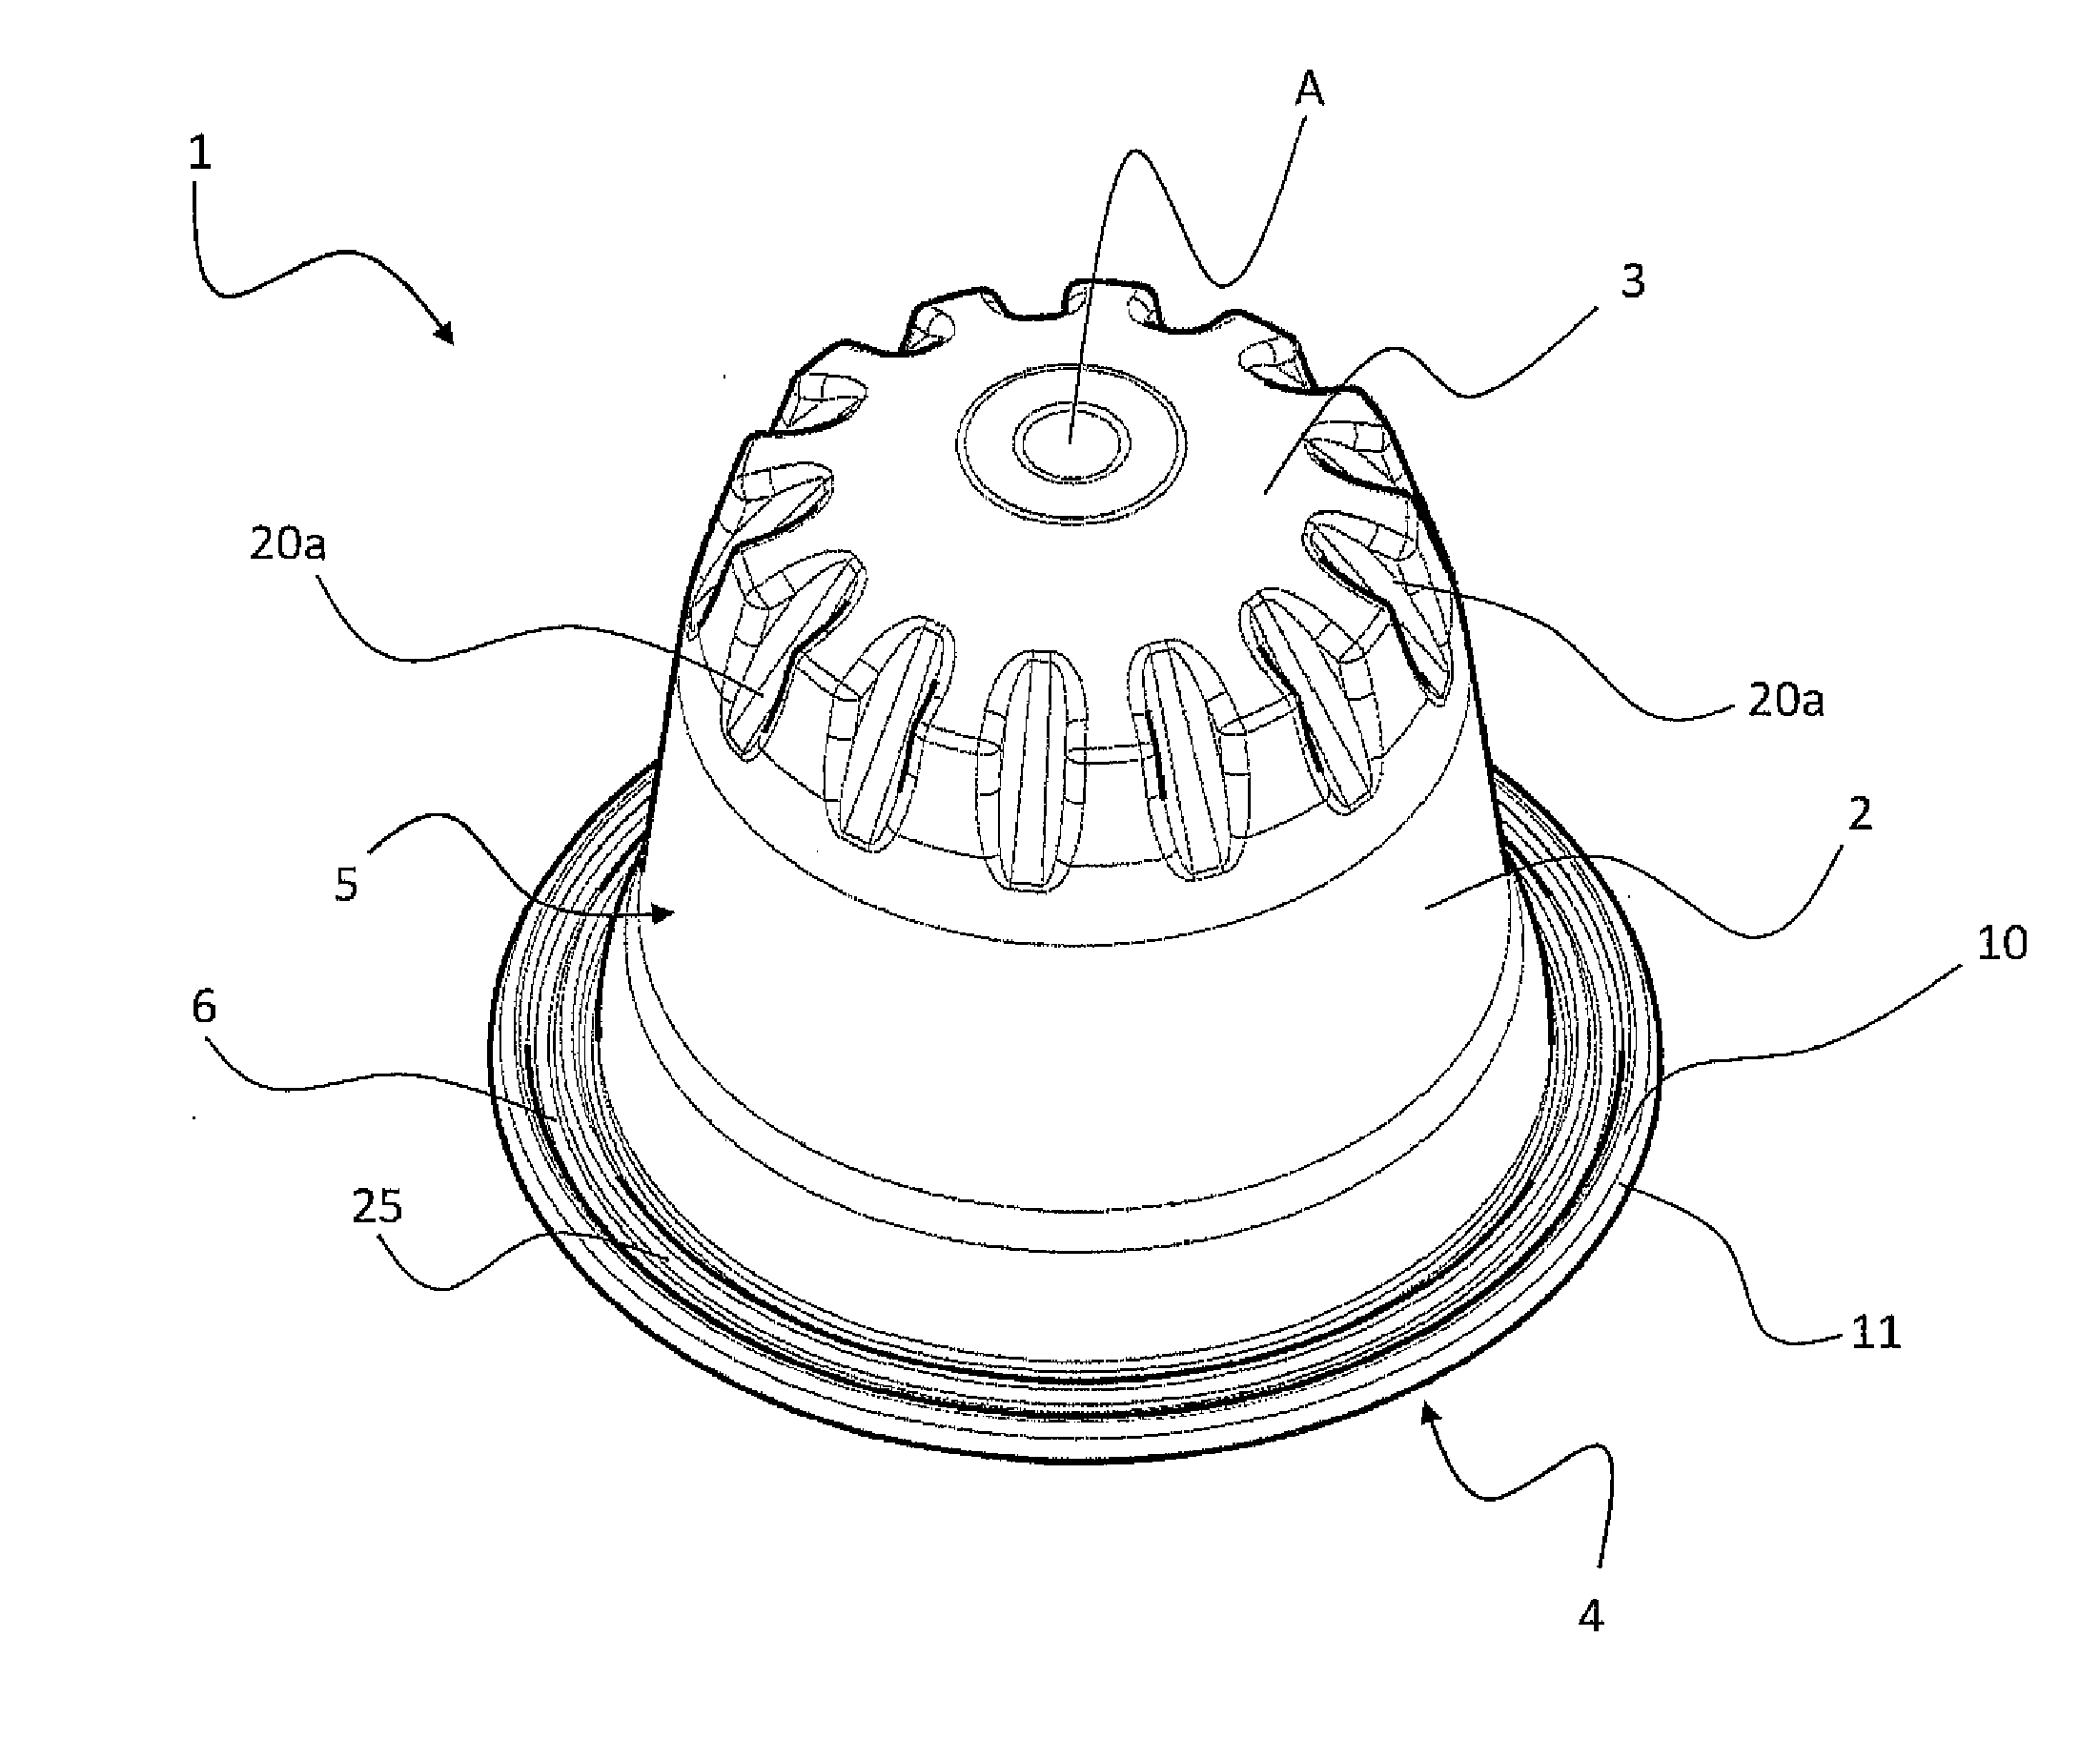 Capsule and system for preparing beverages